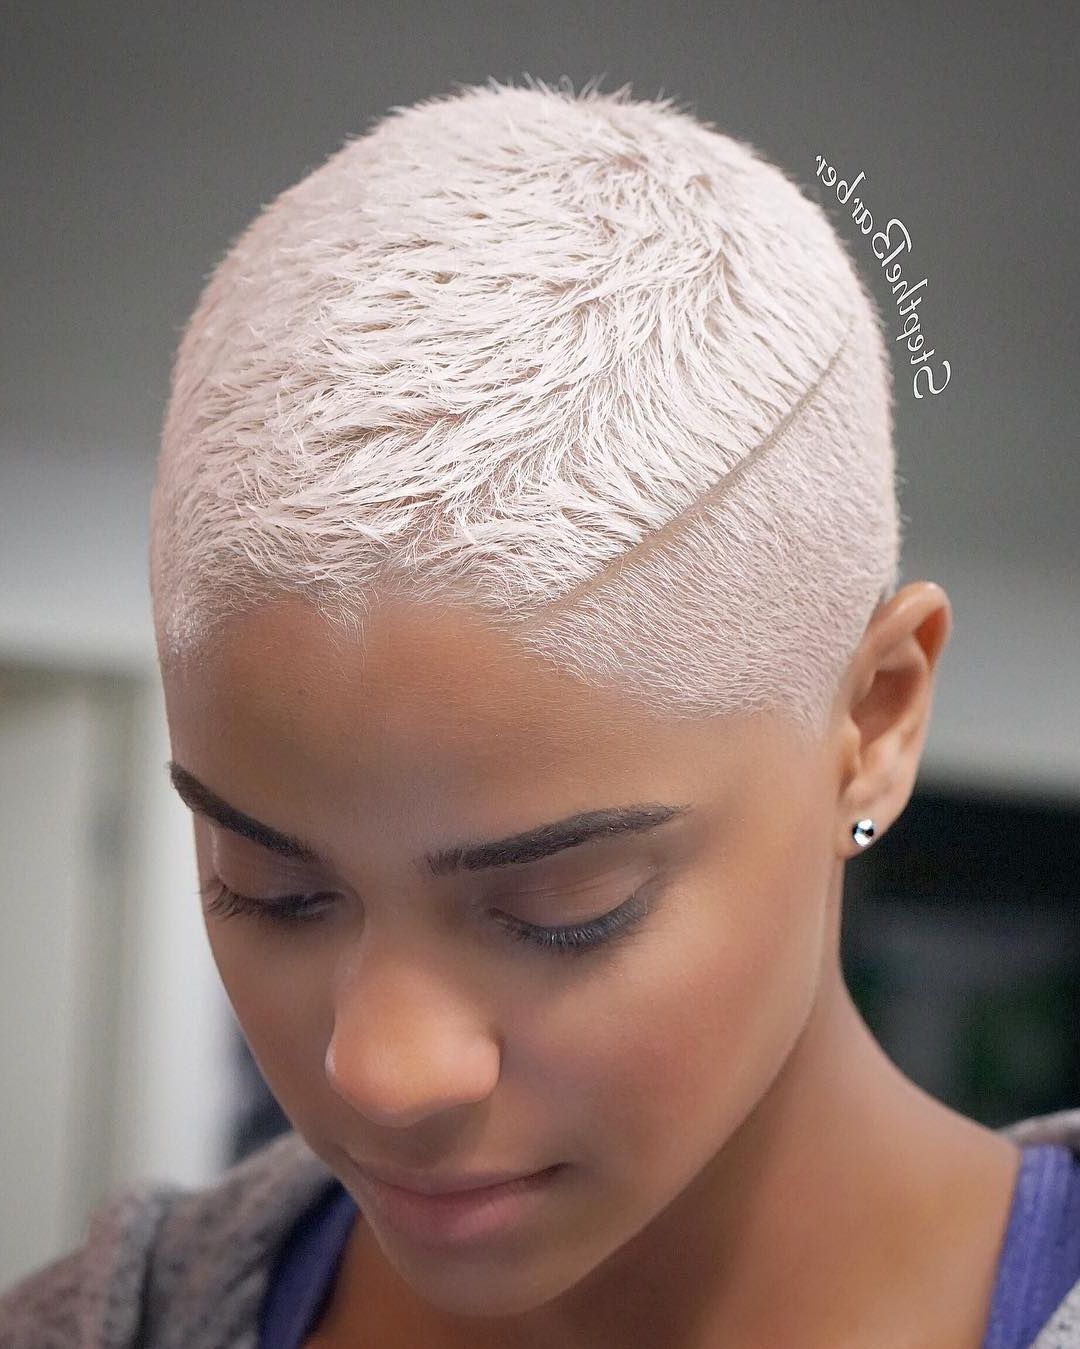 Platinum Blonde Hair On Black Woman. Tapered Short Haircut With A Pertaining To Black Women With Short Hairstyles (Photo 13 of 25)